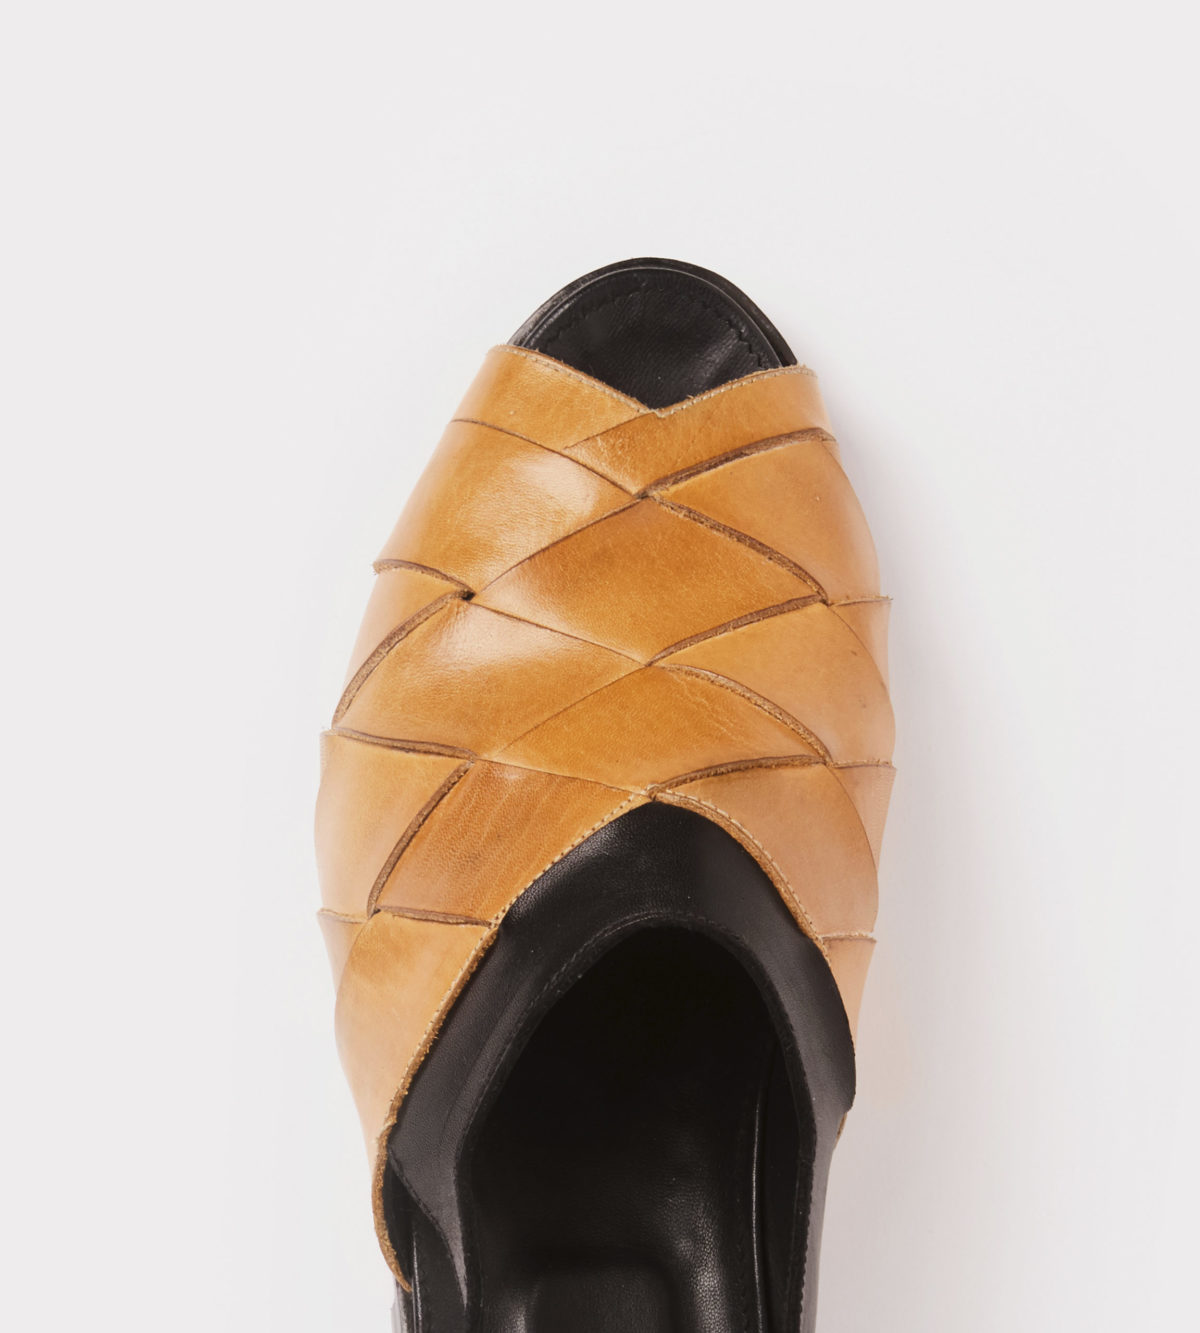 Hand woven sandal in black and natural leather - detail